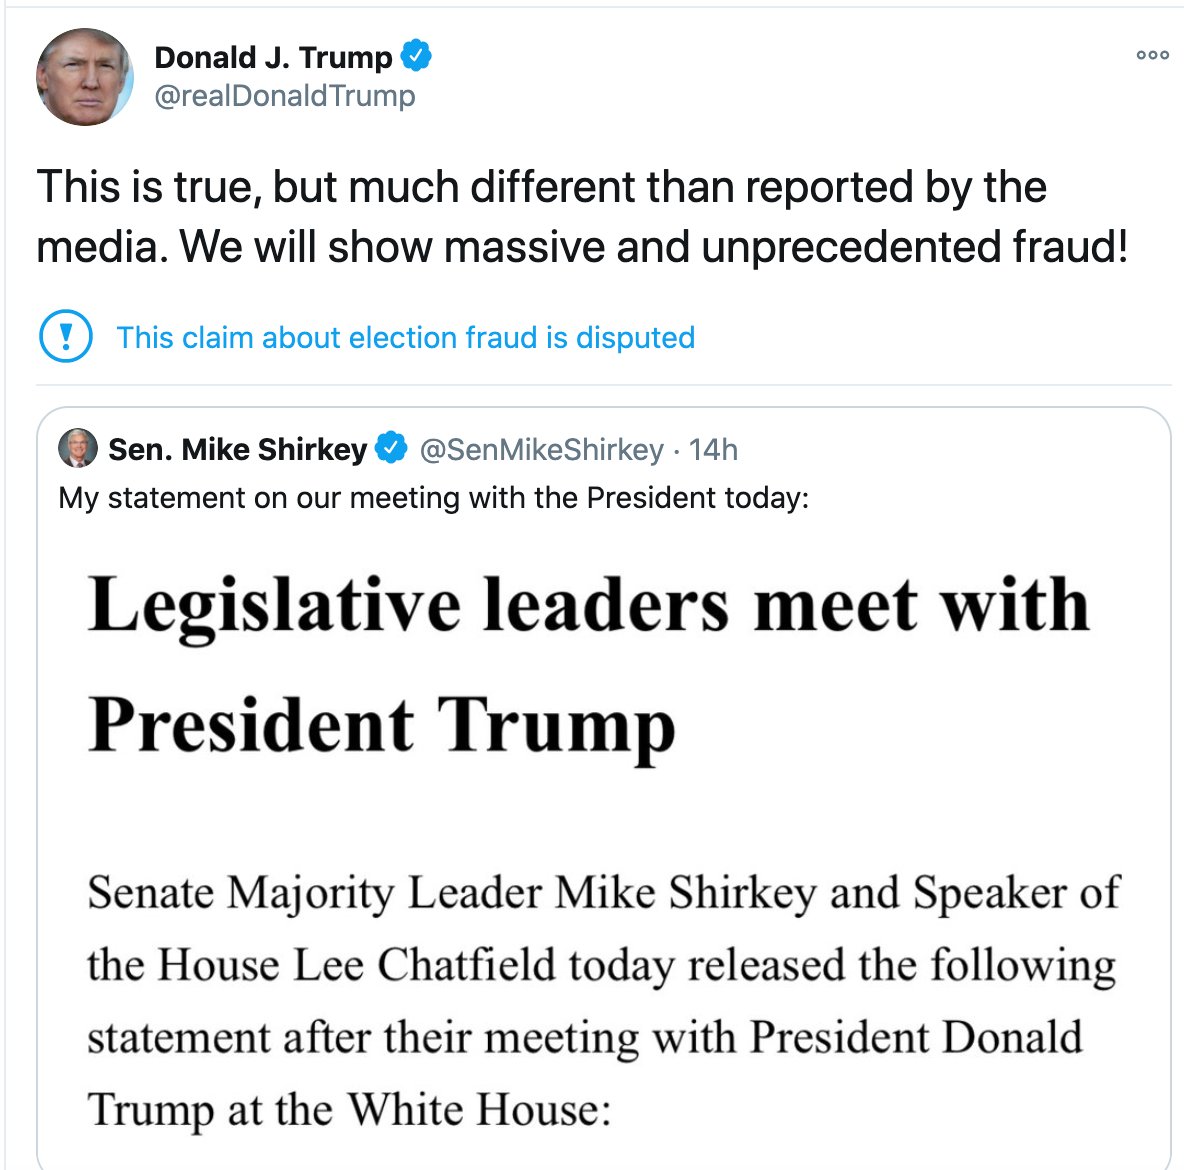 If  @SenMikeShirkey and  @LeeChatfield really did reject Trump's attempt to overturn the election, we will see them quickly disavow the president's statement here and say they recognize Joe Biden as president-elect.